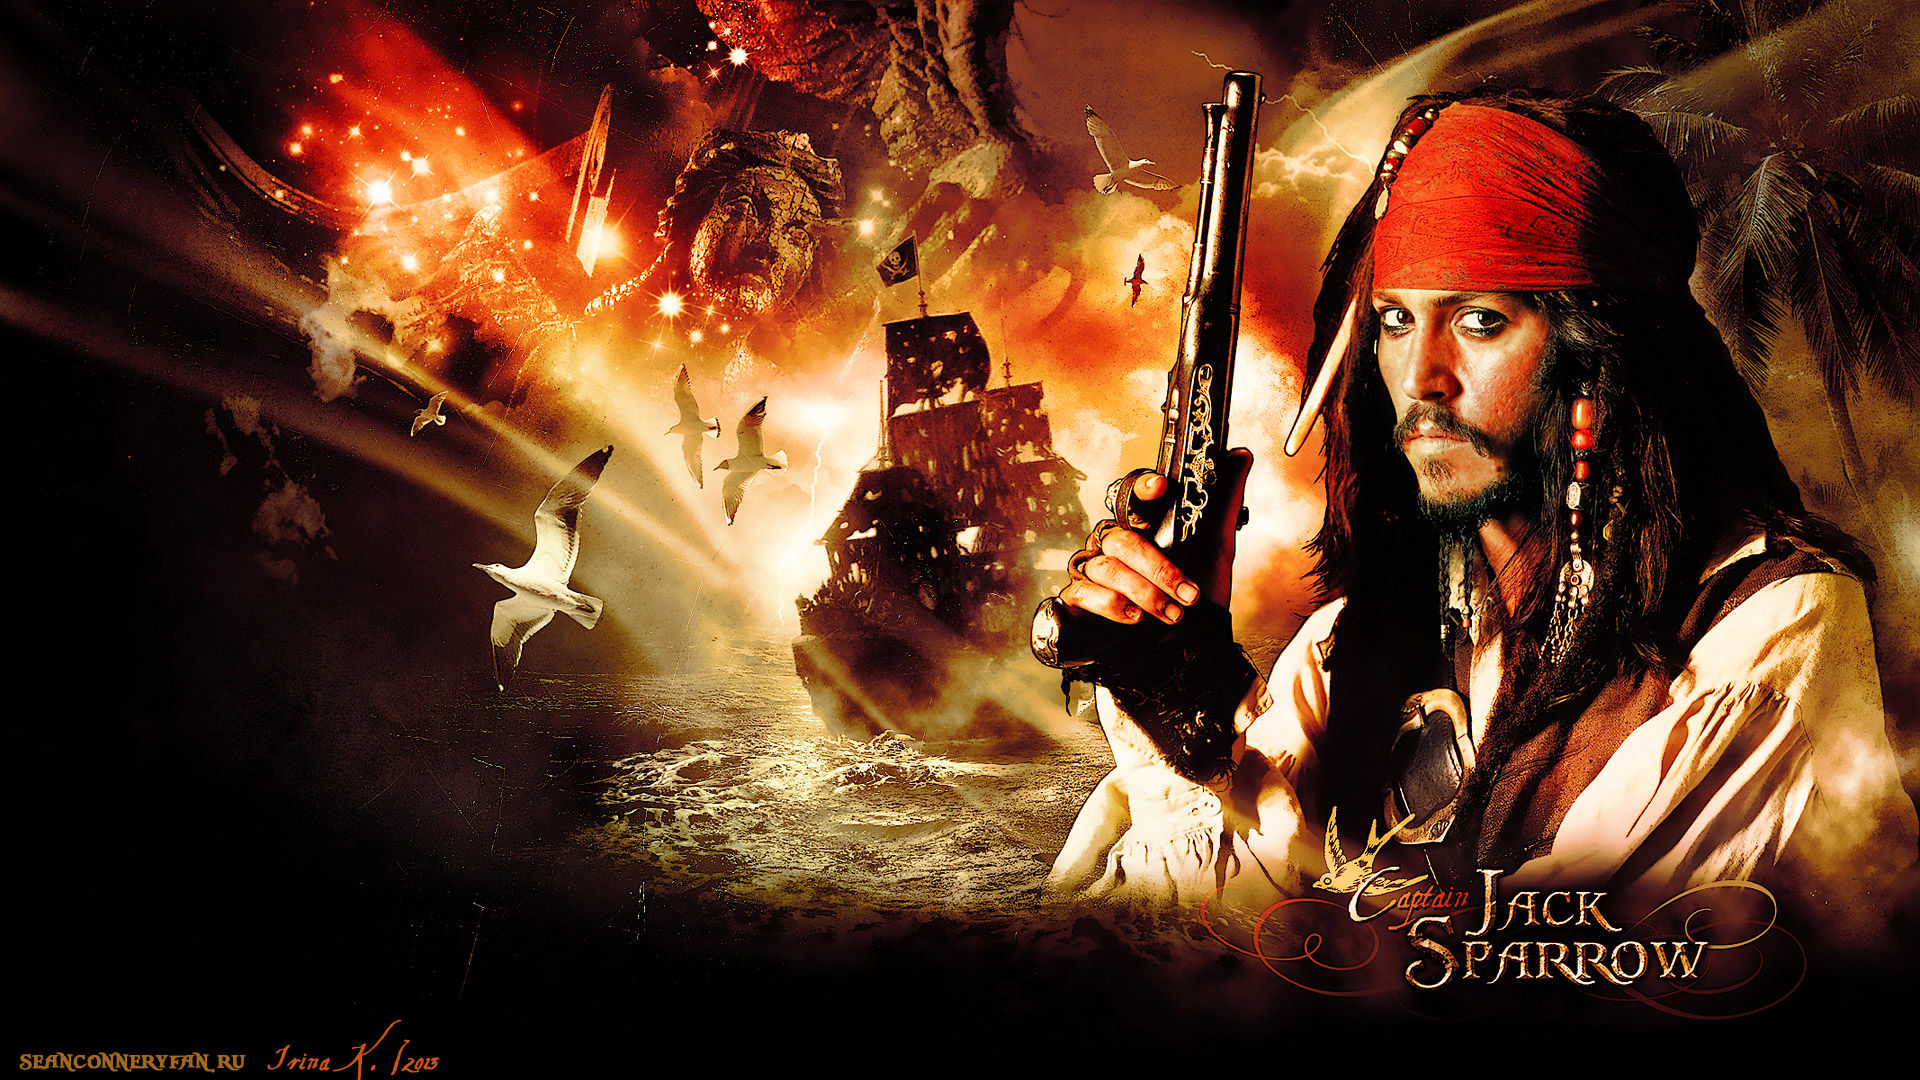   .    (Pirates of the Caribbean. The Curse of the Black Pearl),   (Johnny Depp)  Wallpaper